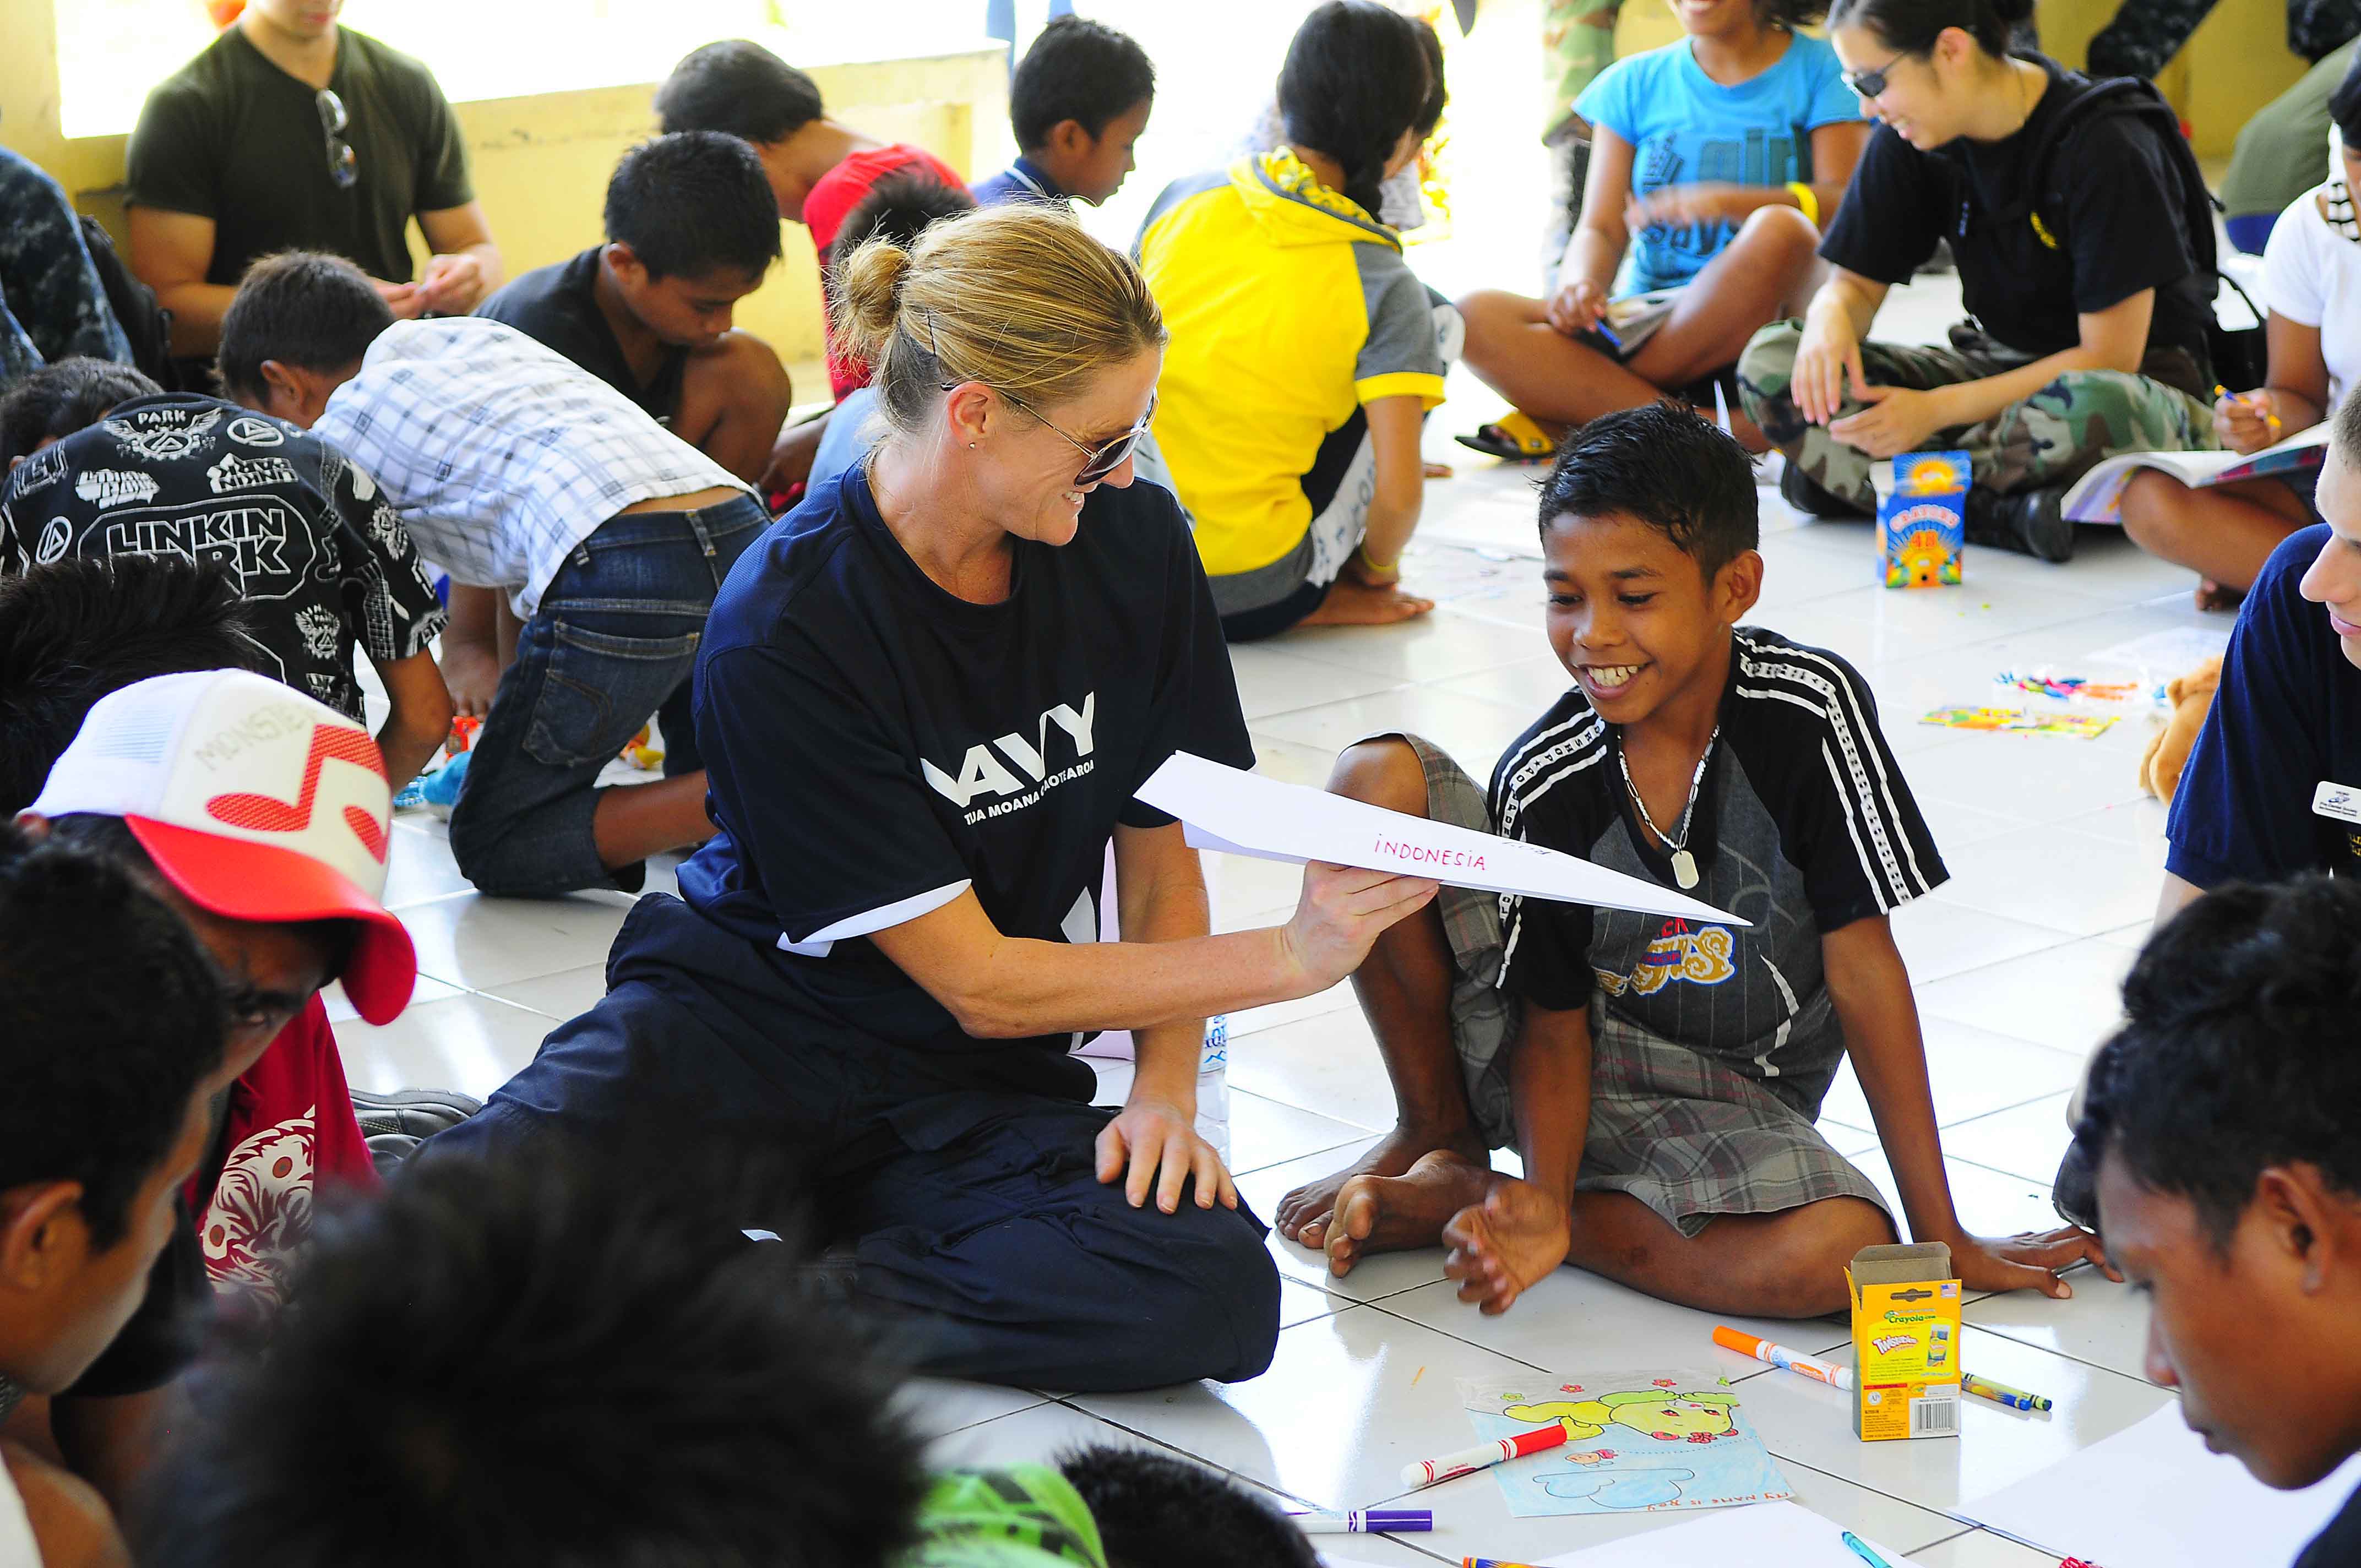 US Navy 100714-N-6410J-196 New Zealand Defense Force Lt. Cmdr. Kerry Climo gives a boy a paper airplane she made while spending time with children at the Rumah Sejahtera Bagi Anak Orphanage